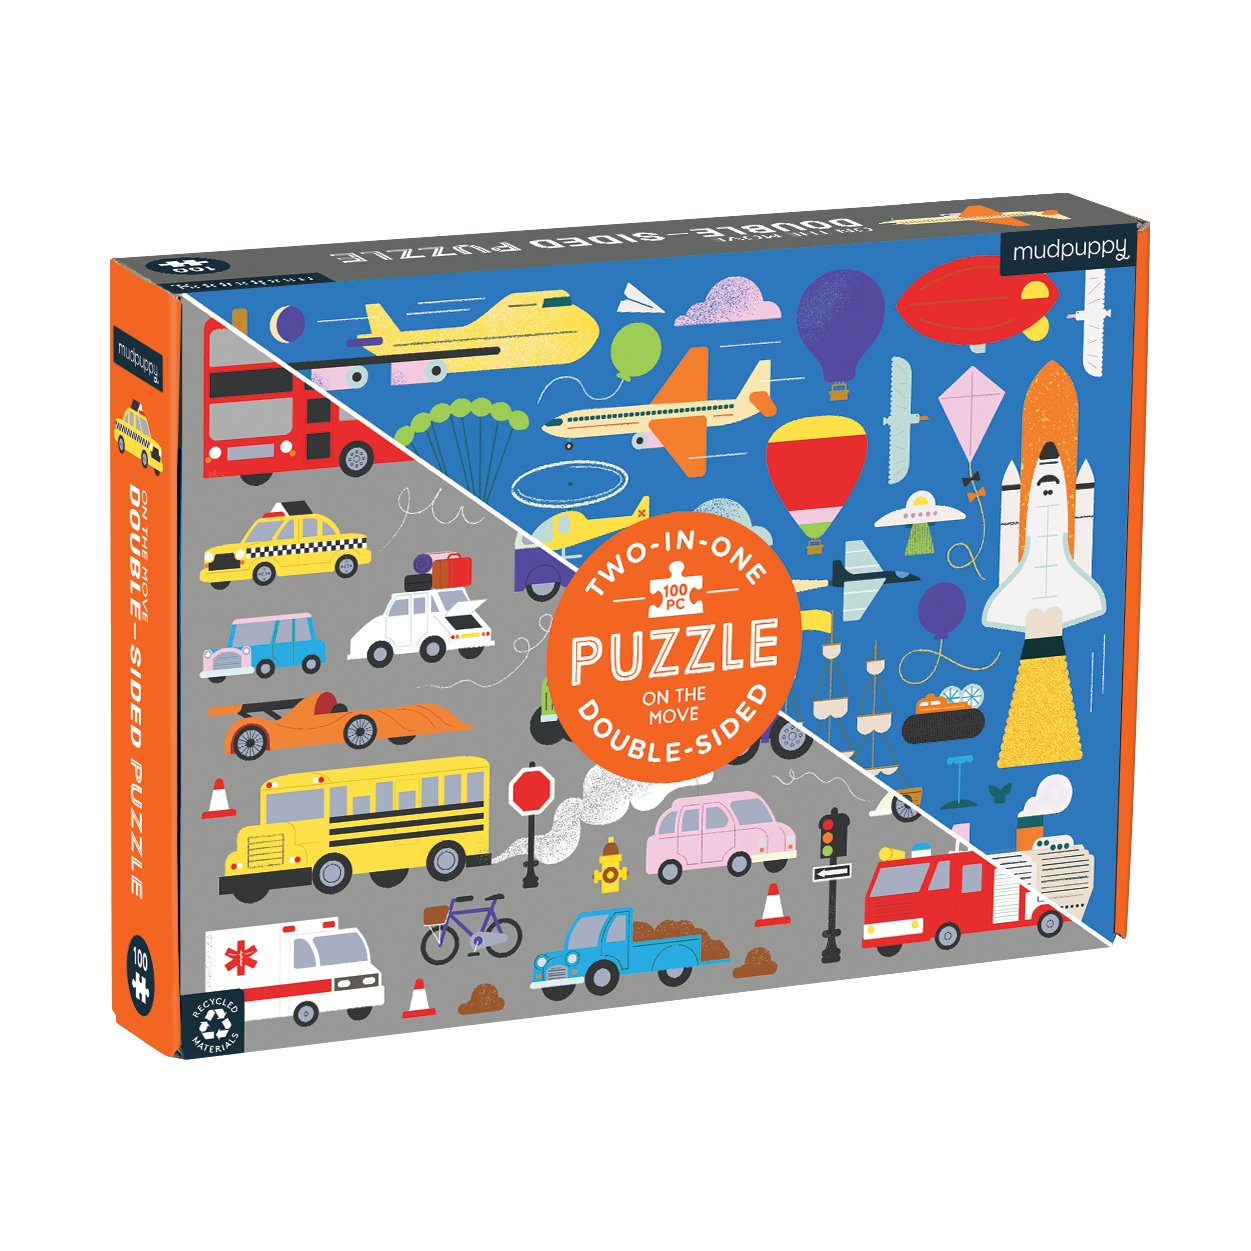 Double Sided Puzzle On the Move